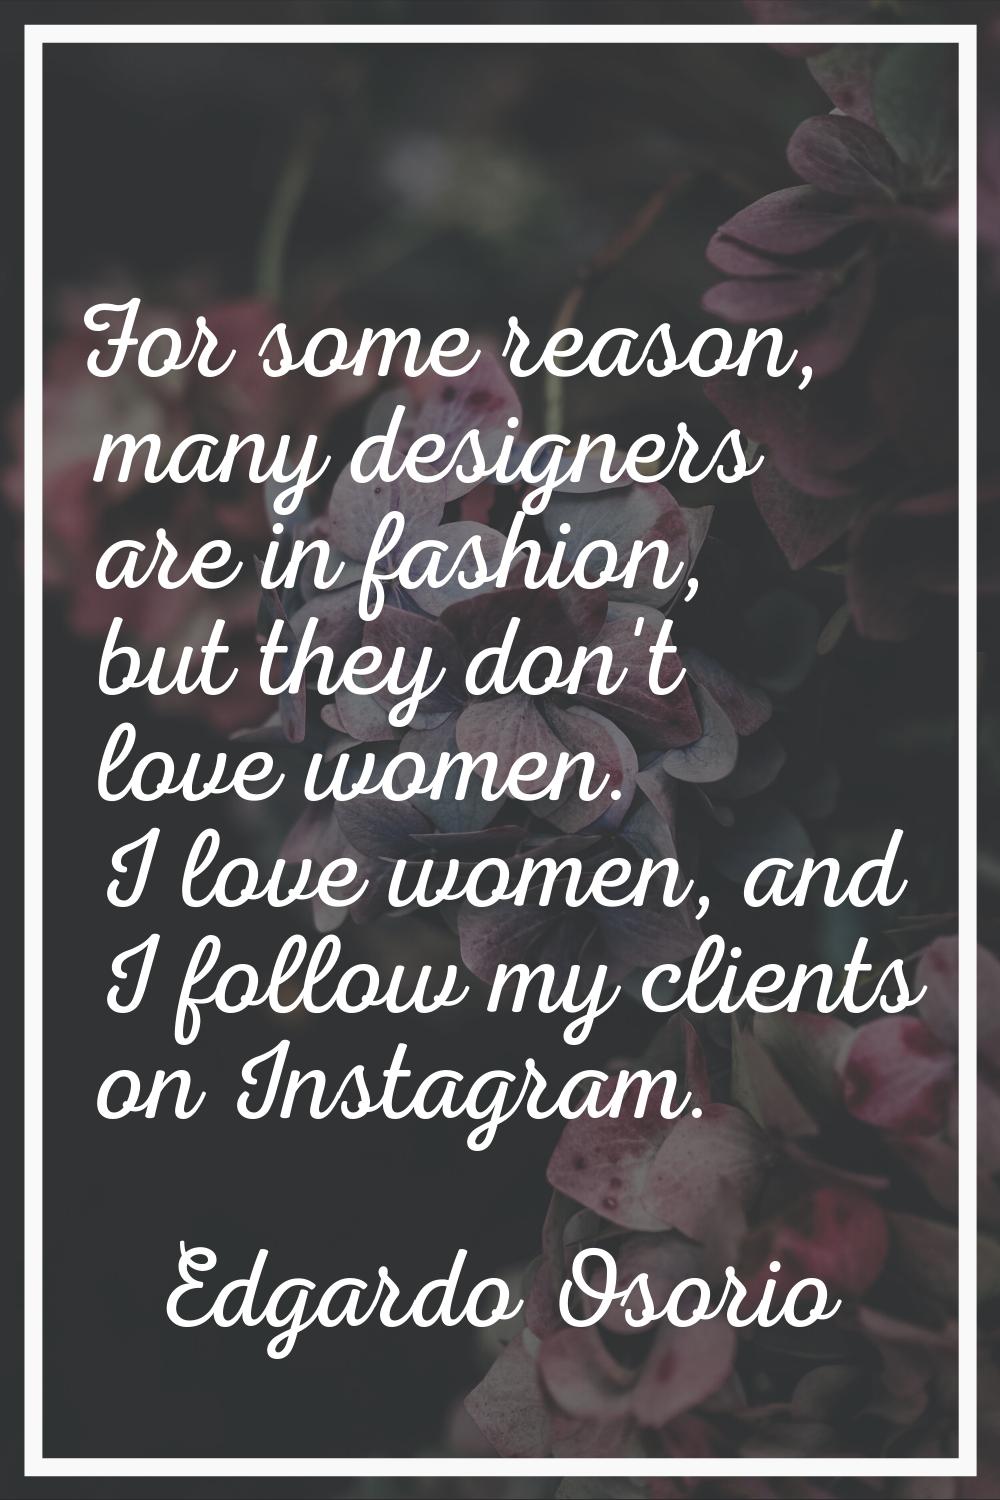 For some reason, many designers are in fashion, but they don't love women. I love women, and I foll